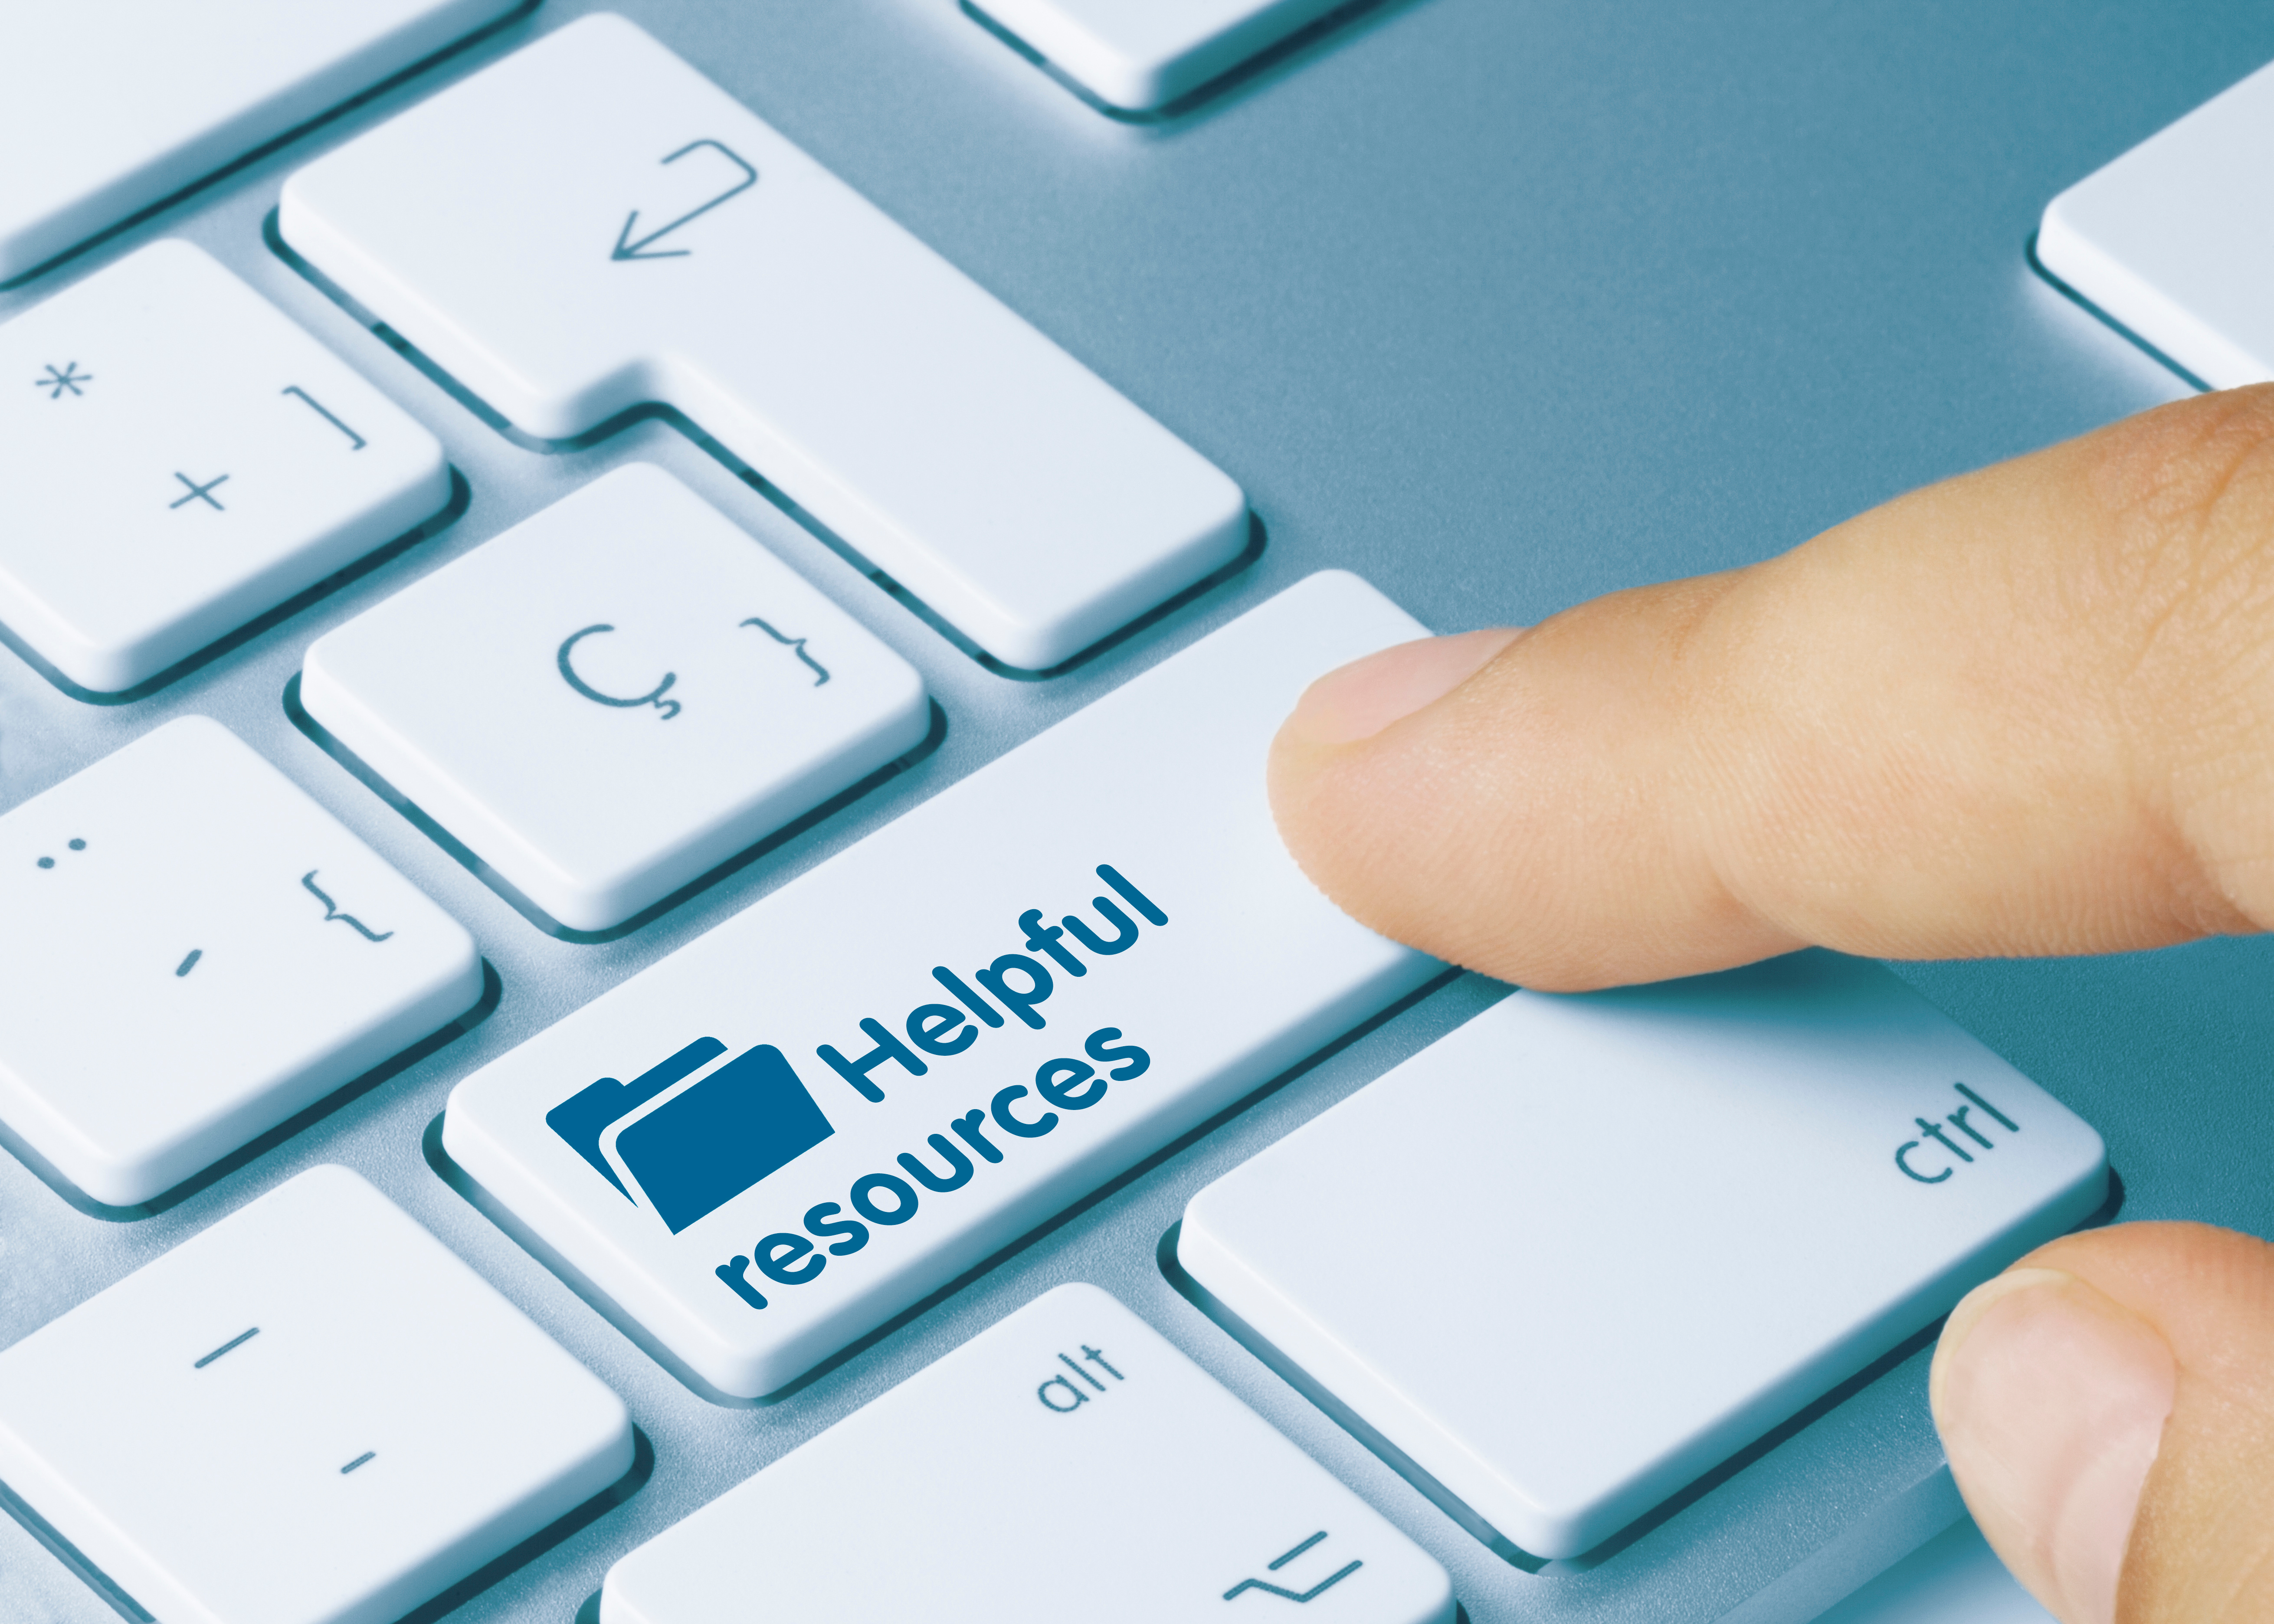 Index finger hitting a kebyoard button renamed "Helpful resources"